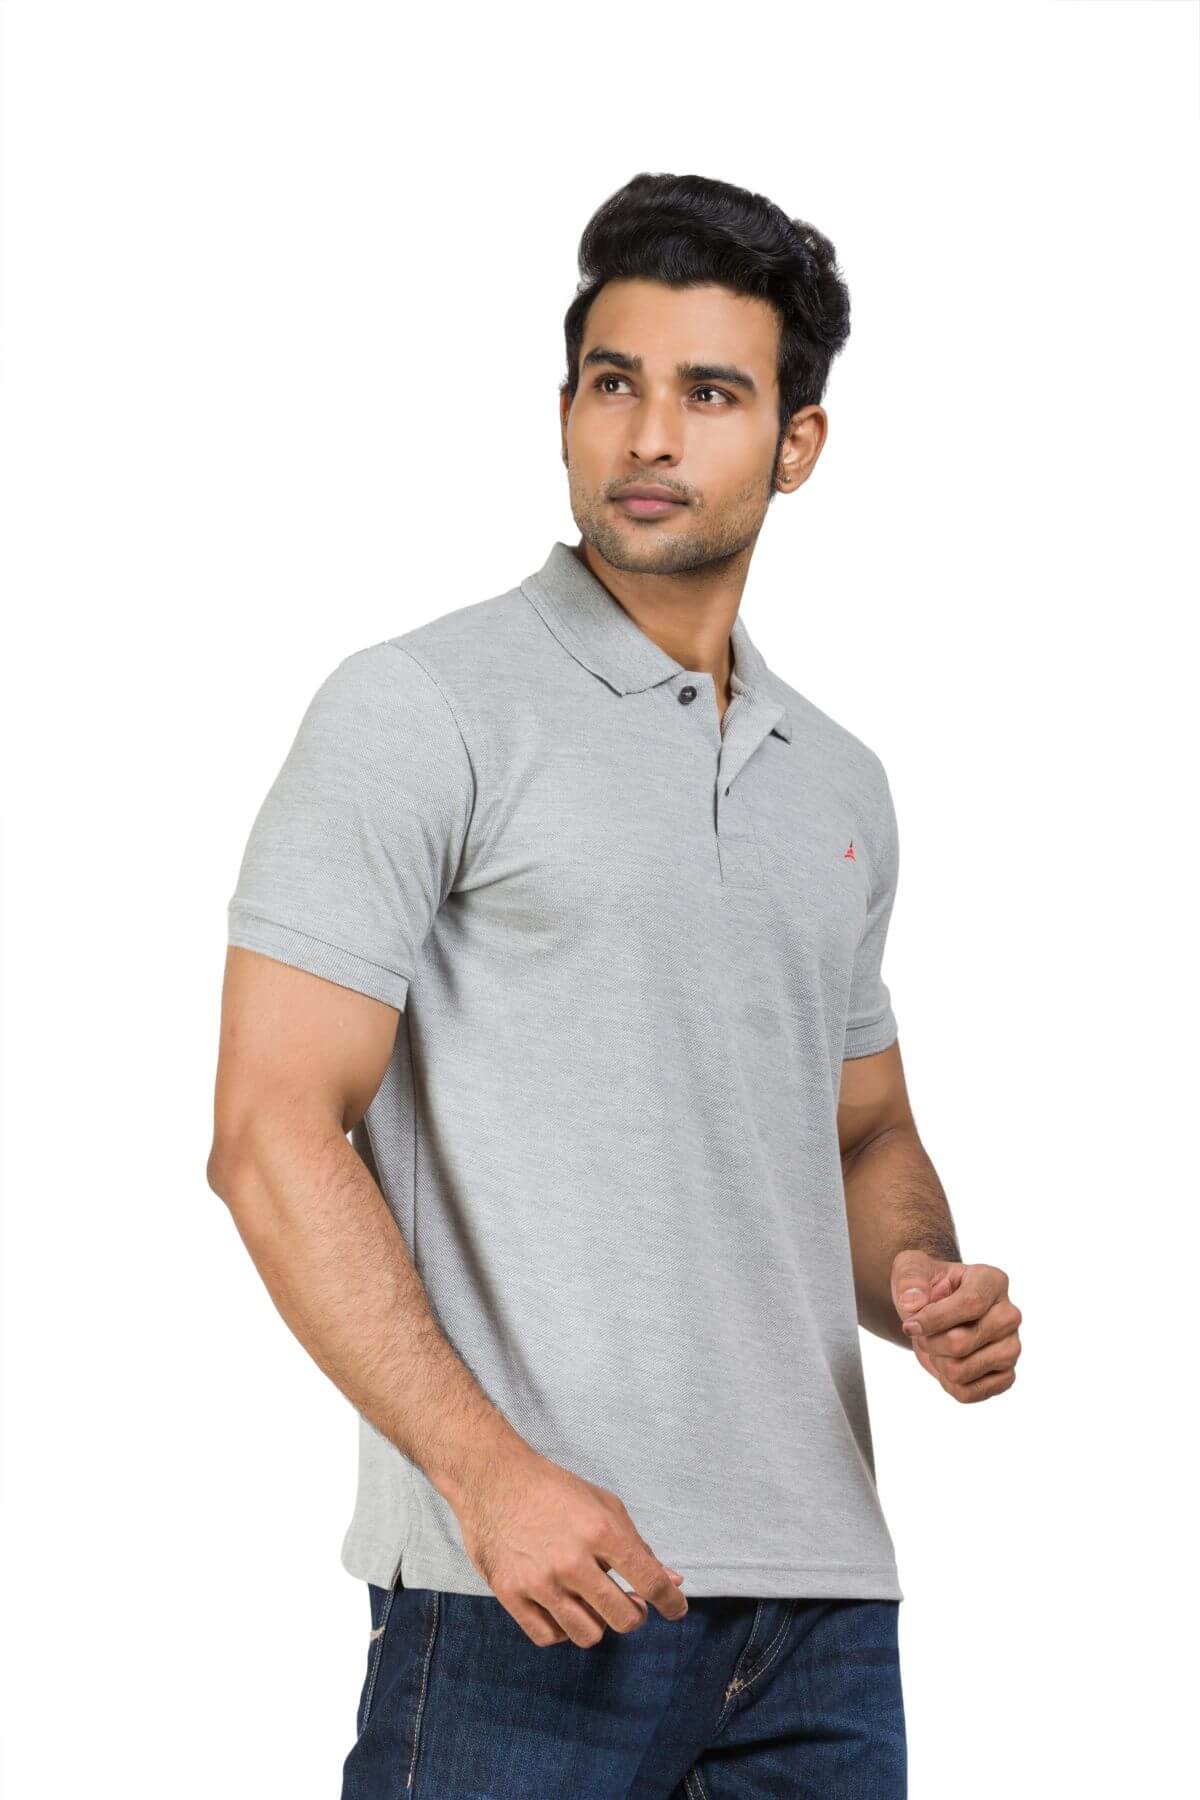 Cotton Blend Solid Grey Polo T-shirt For Men